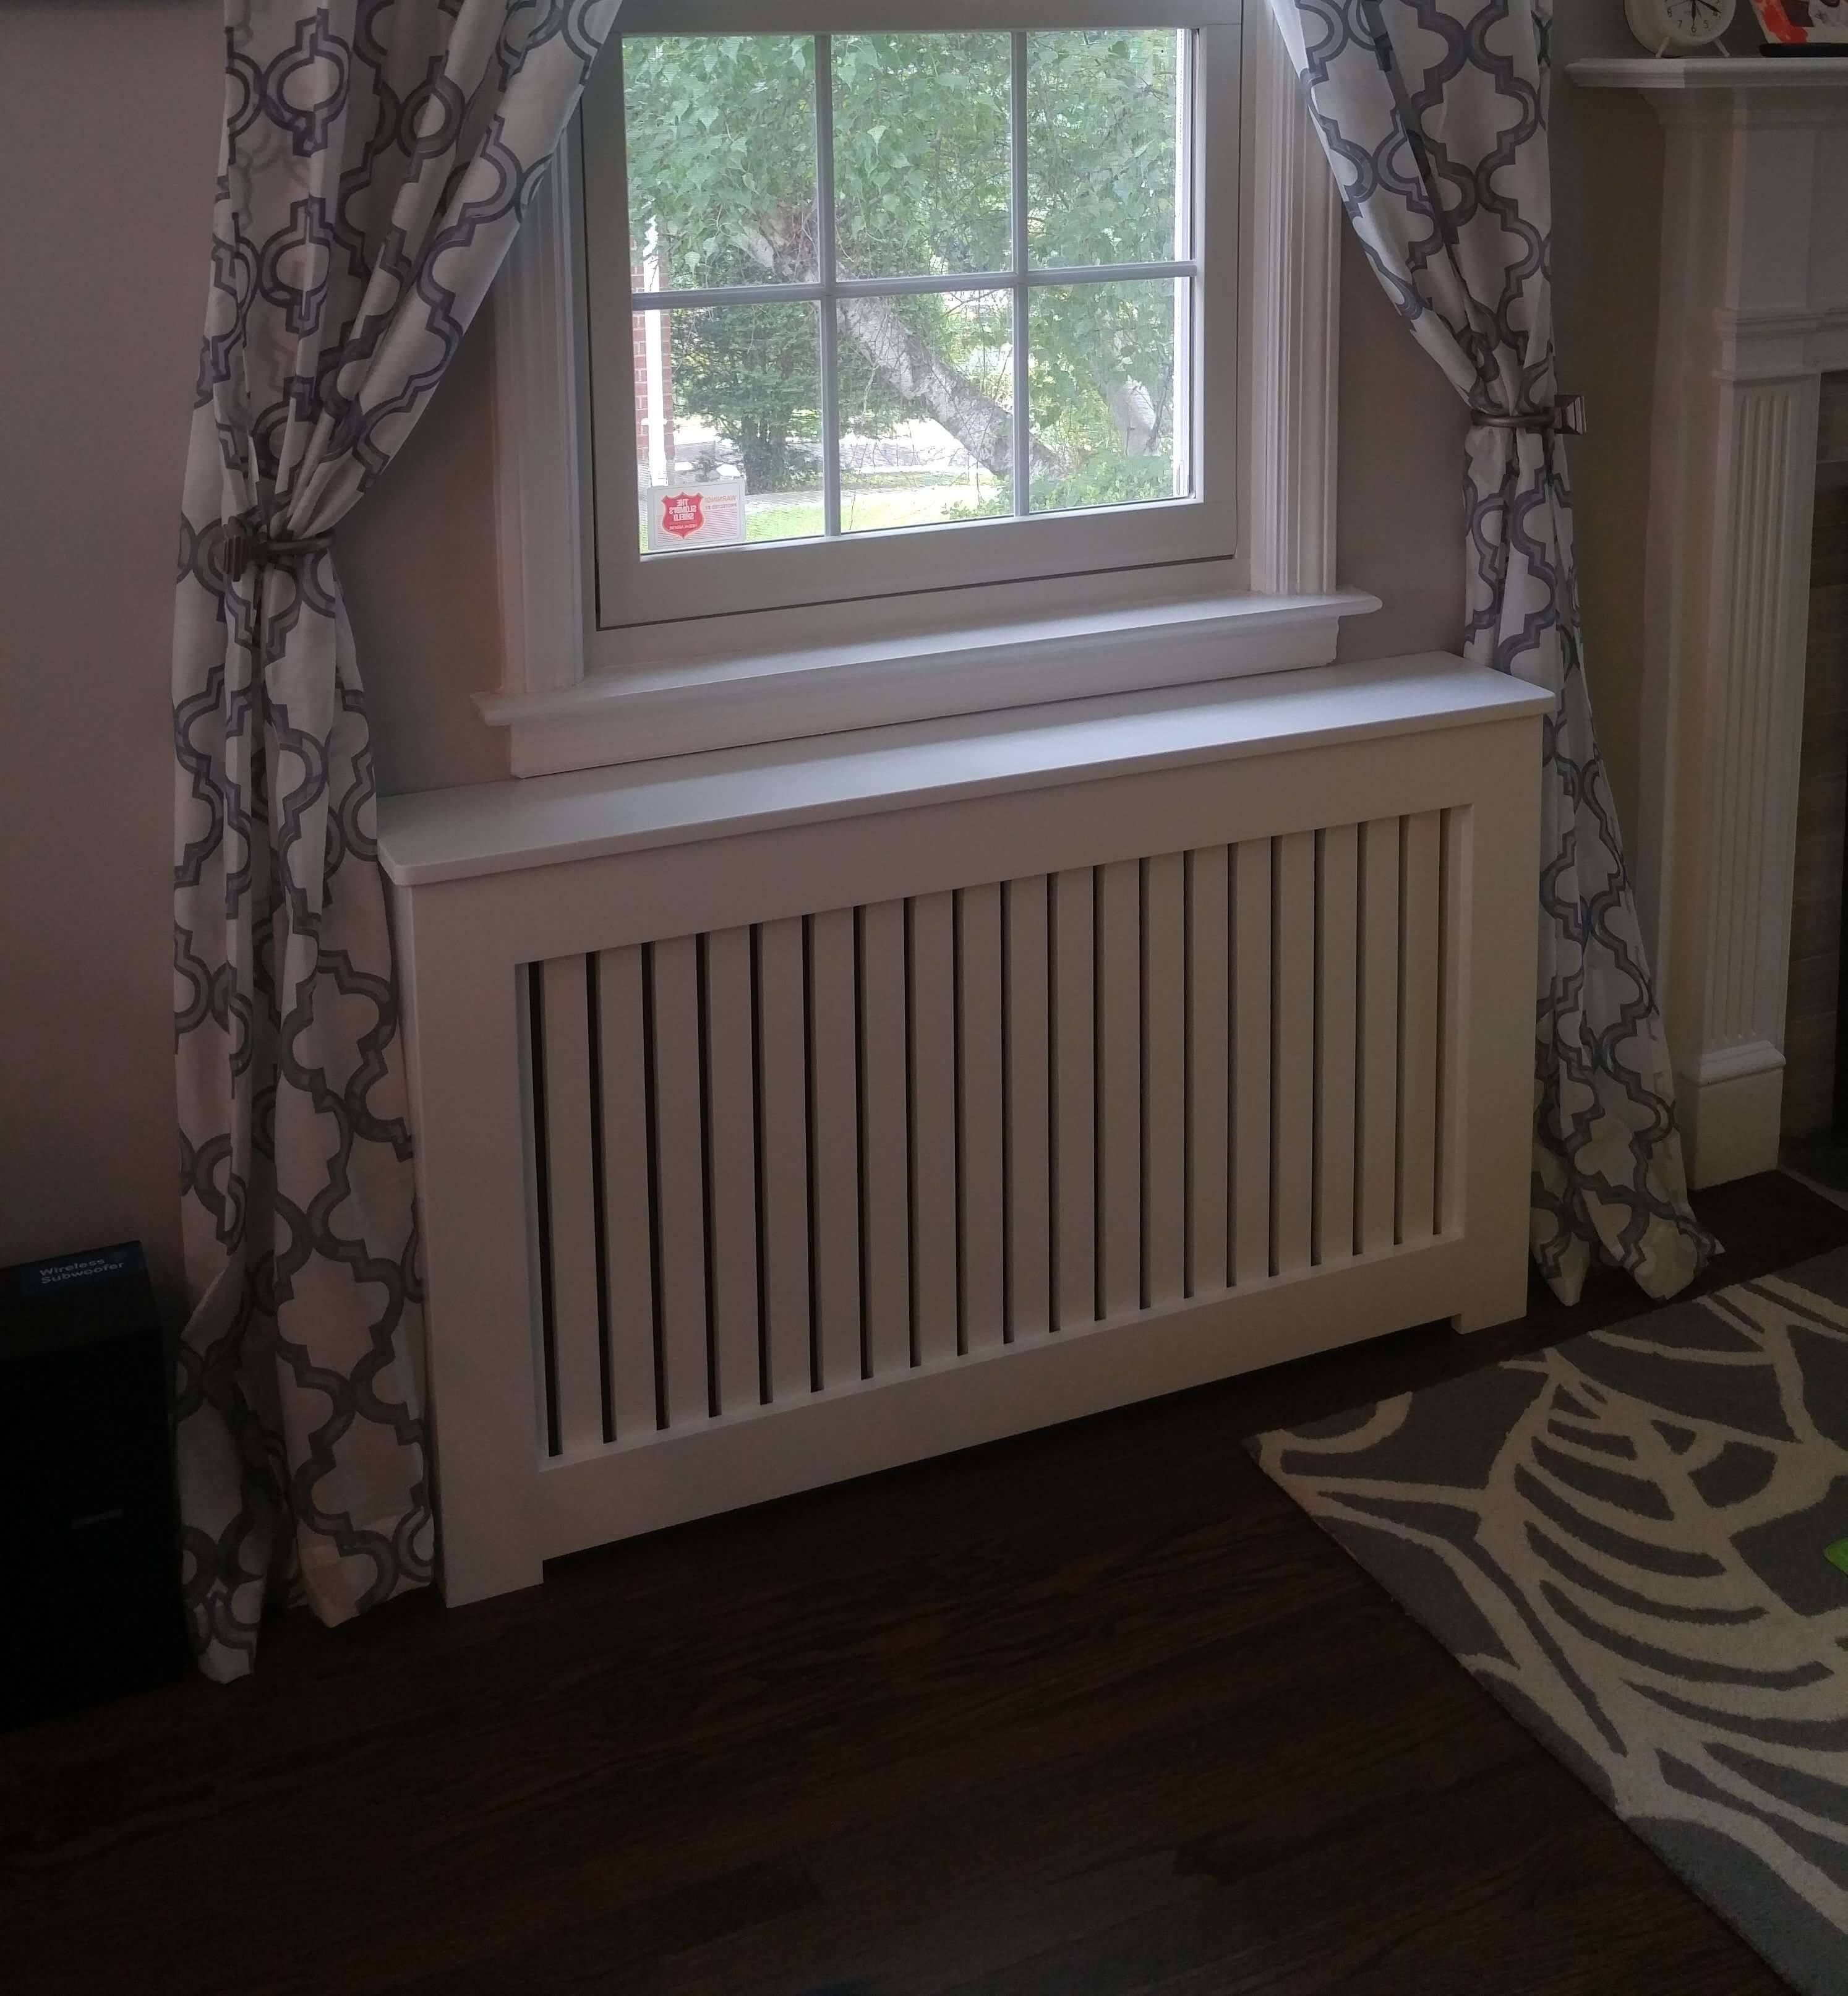 Shaker radiator cover with rounded edges and 1/2-inch gap between the slots under a living room window. 